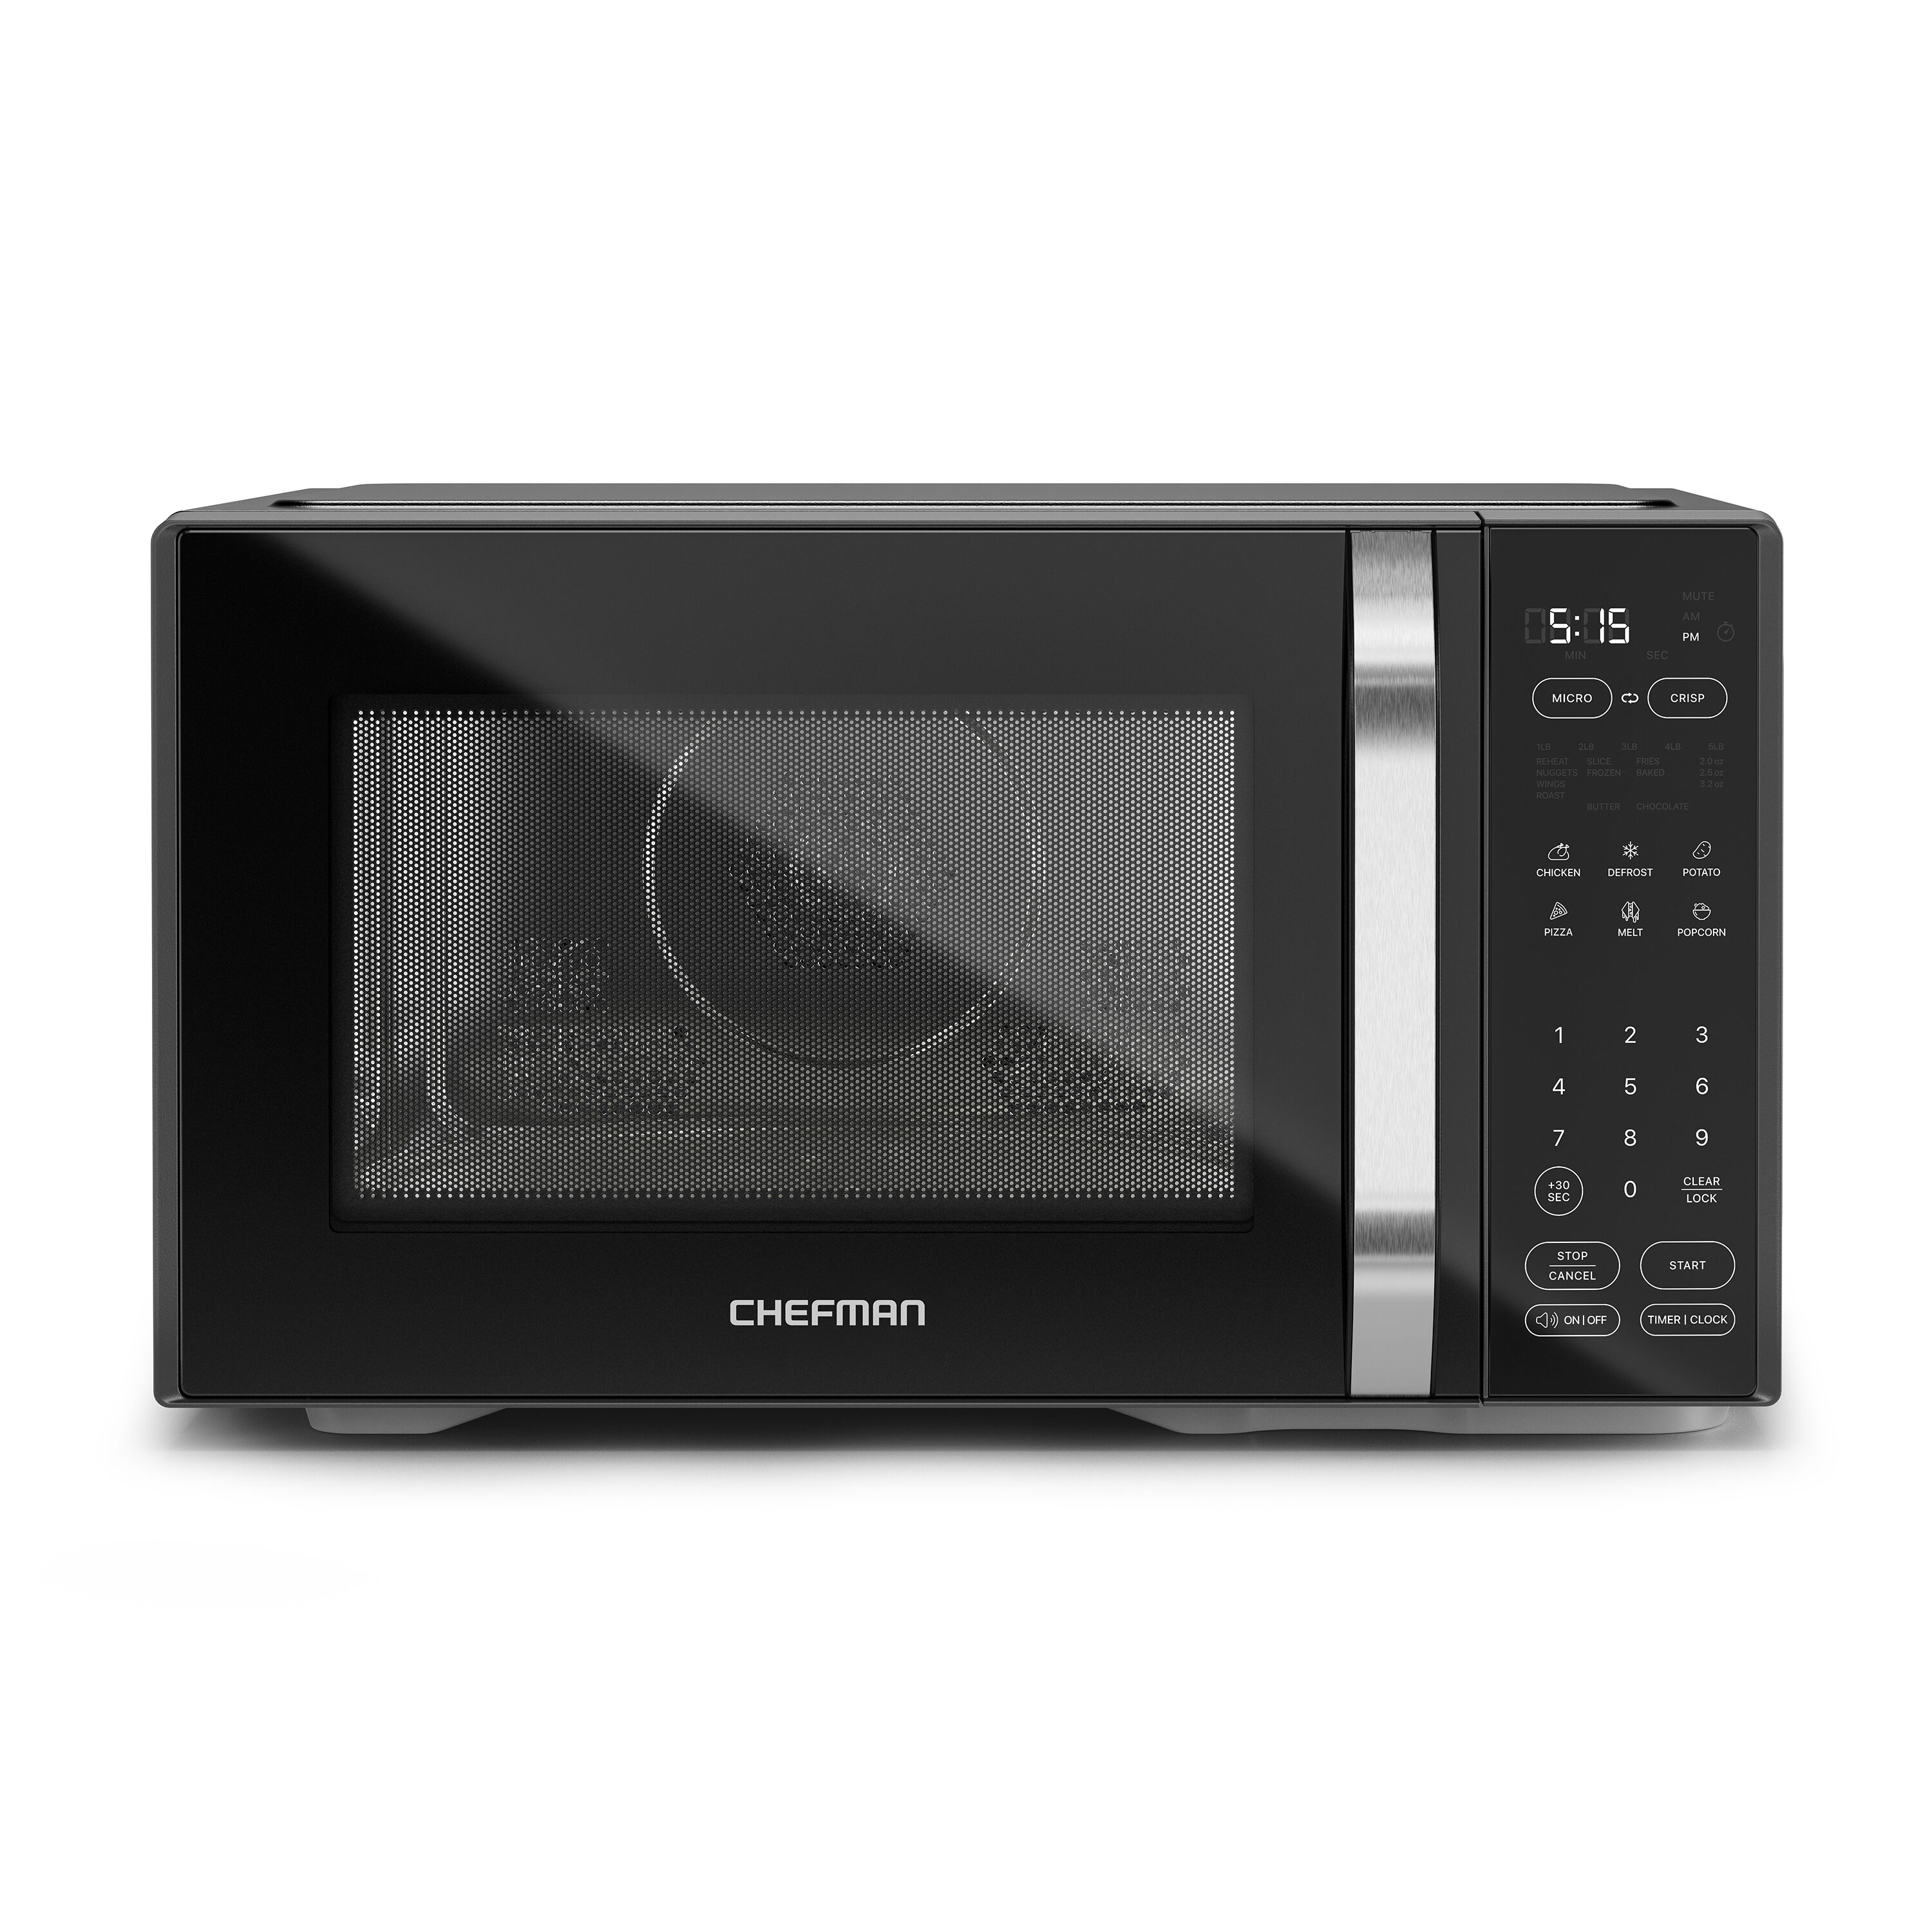 MAGIC CHEF Countertop Microwave Oven - Black, 1.1 cu ft - Foods Co.